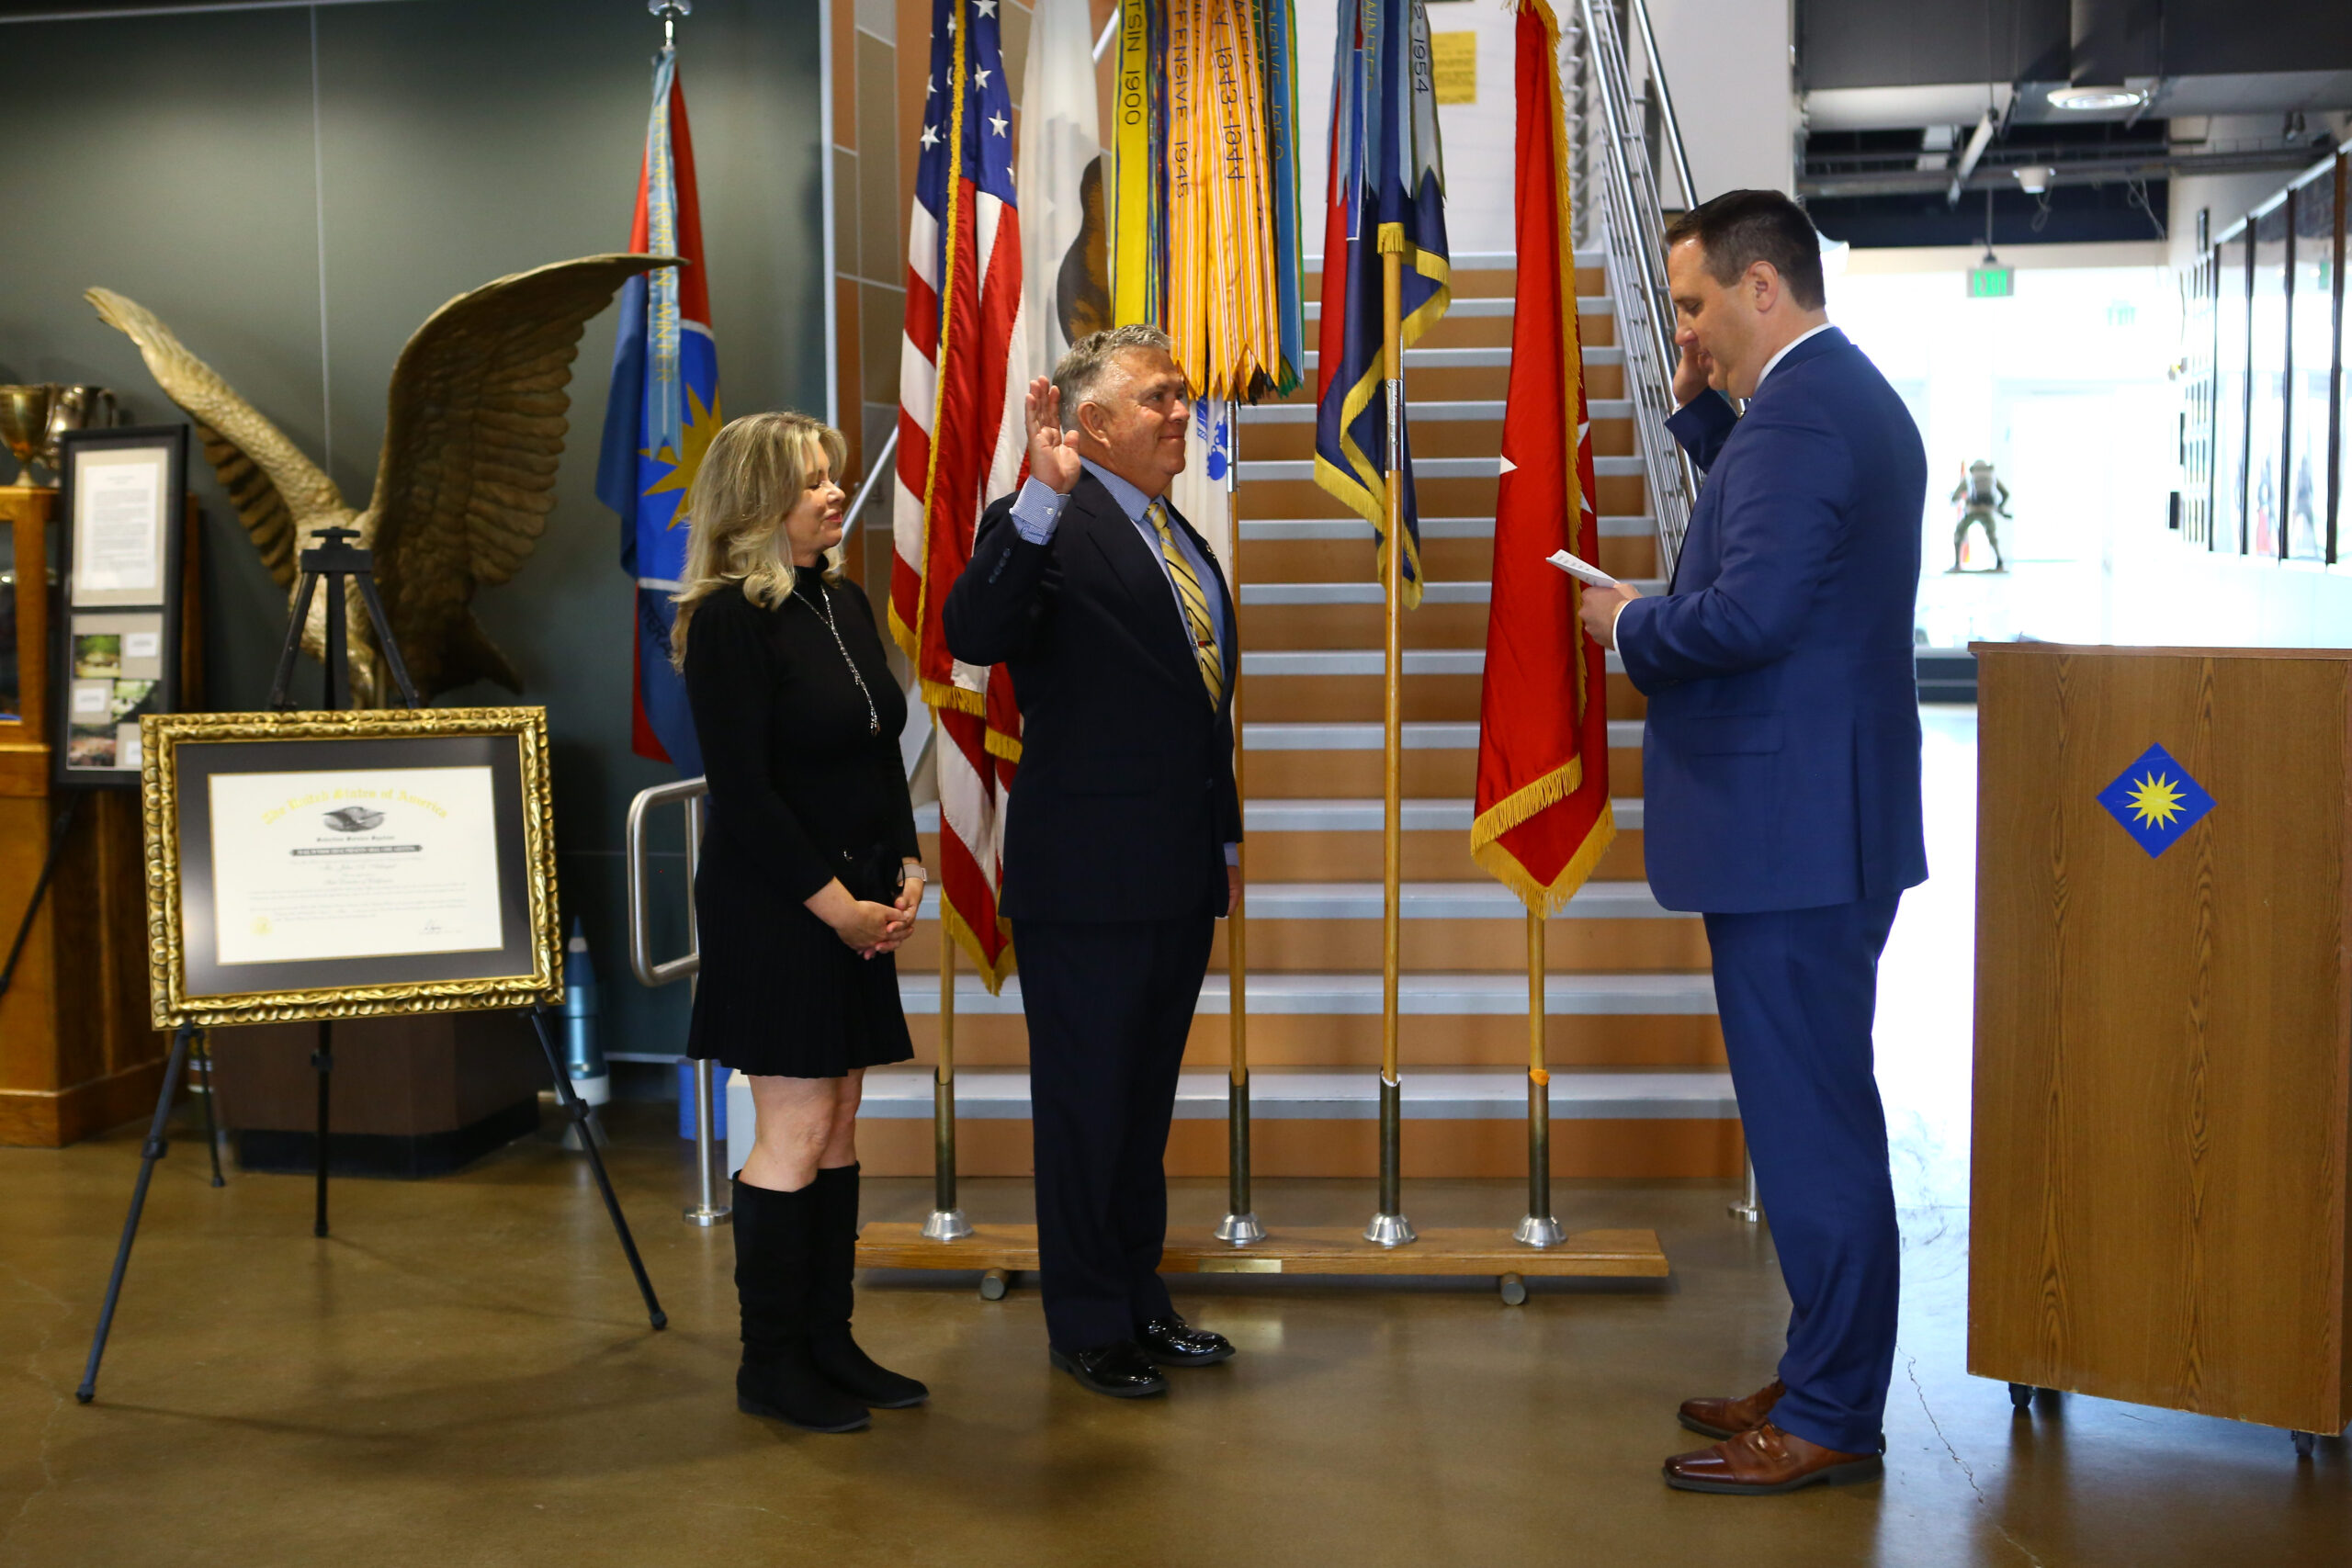 Selective Service System Acting Director Joel C. Spangenberg, right, administers the oath of office to John A. Arbogast, center, the system’s new state director for California, as Arbogast’s wife, Nancie, looks on during a ceremony,